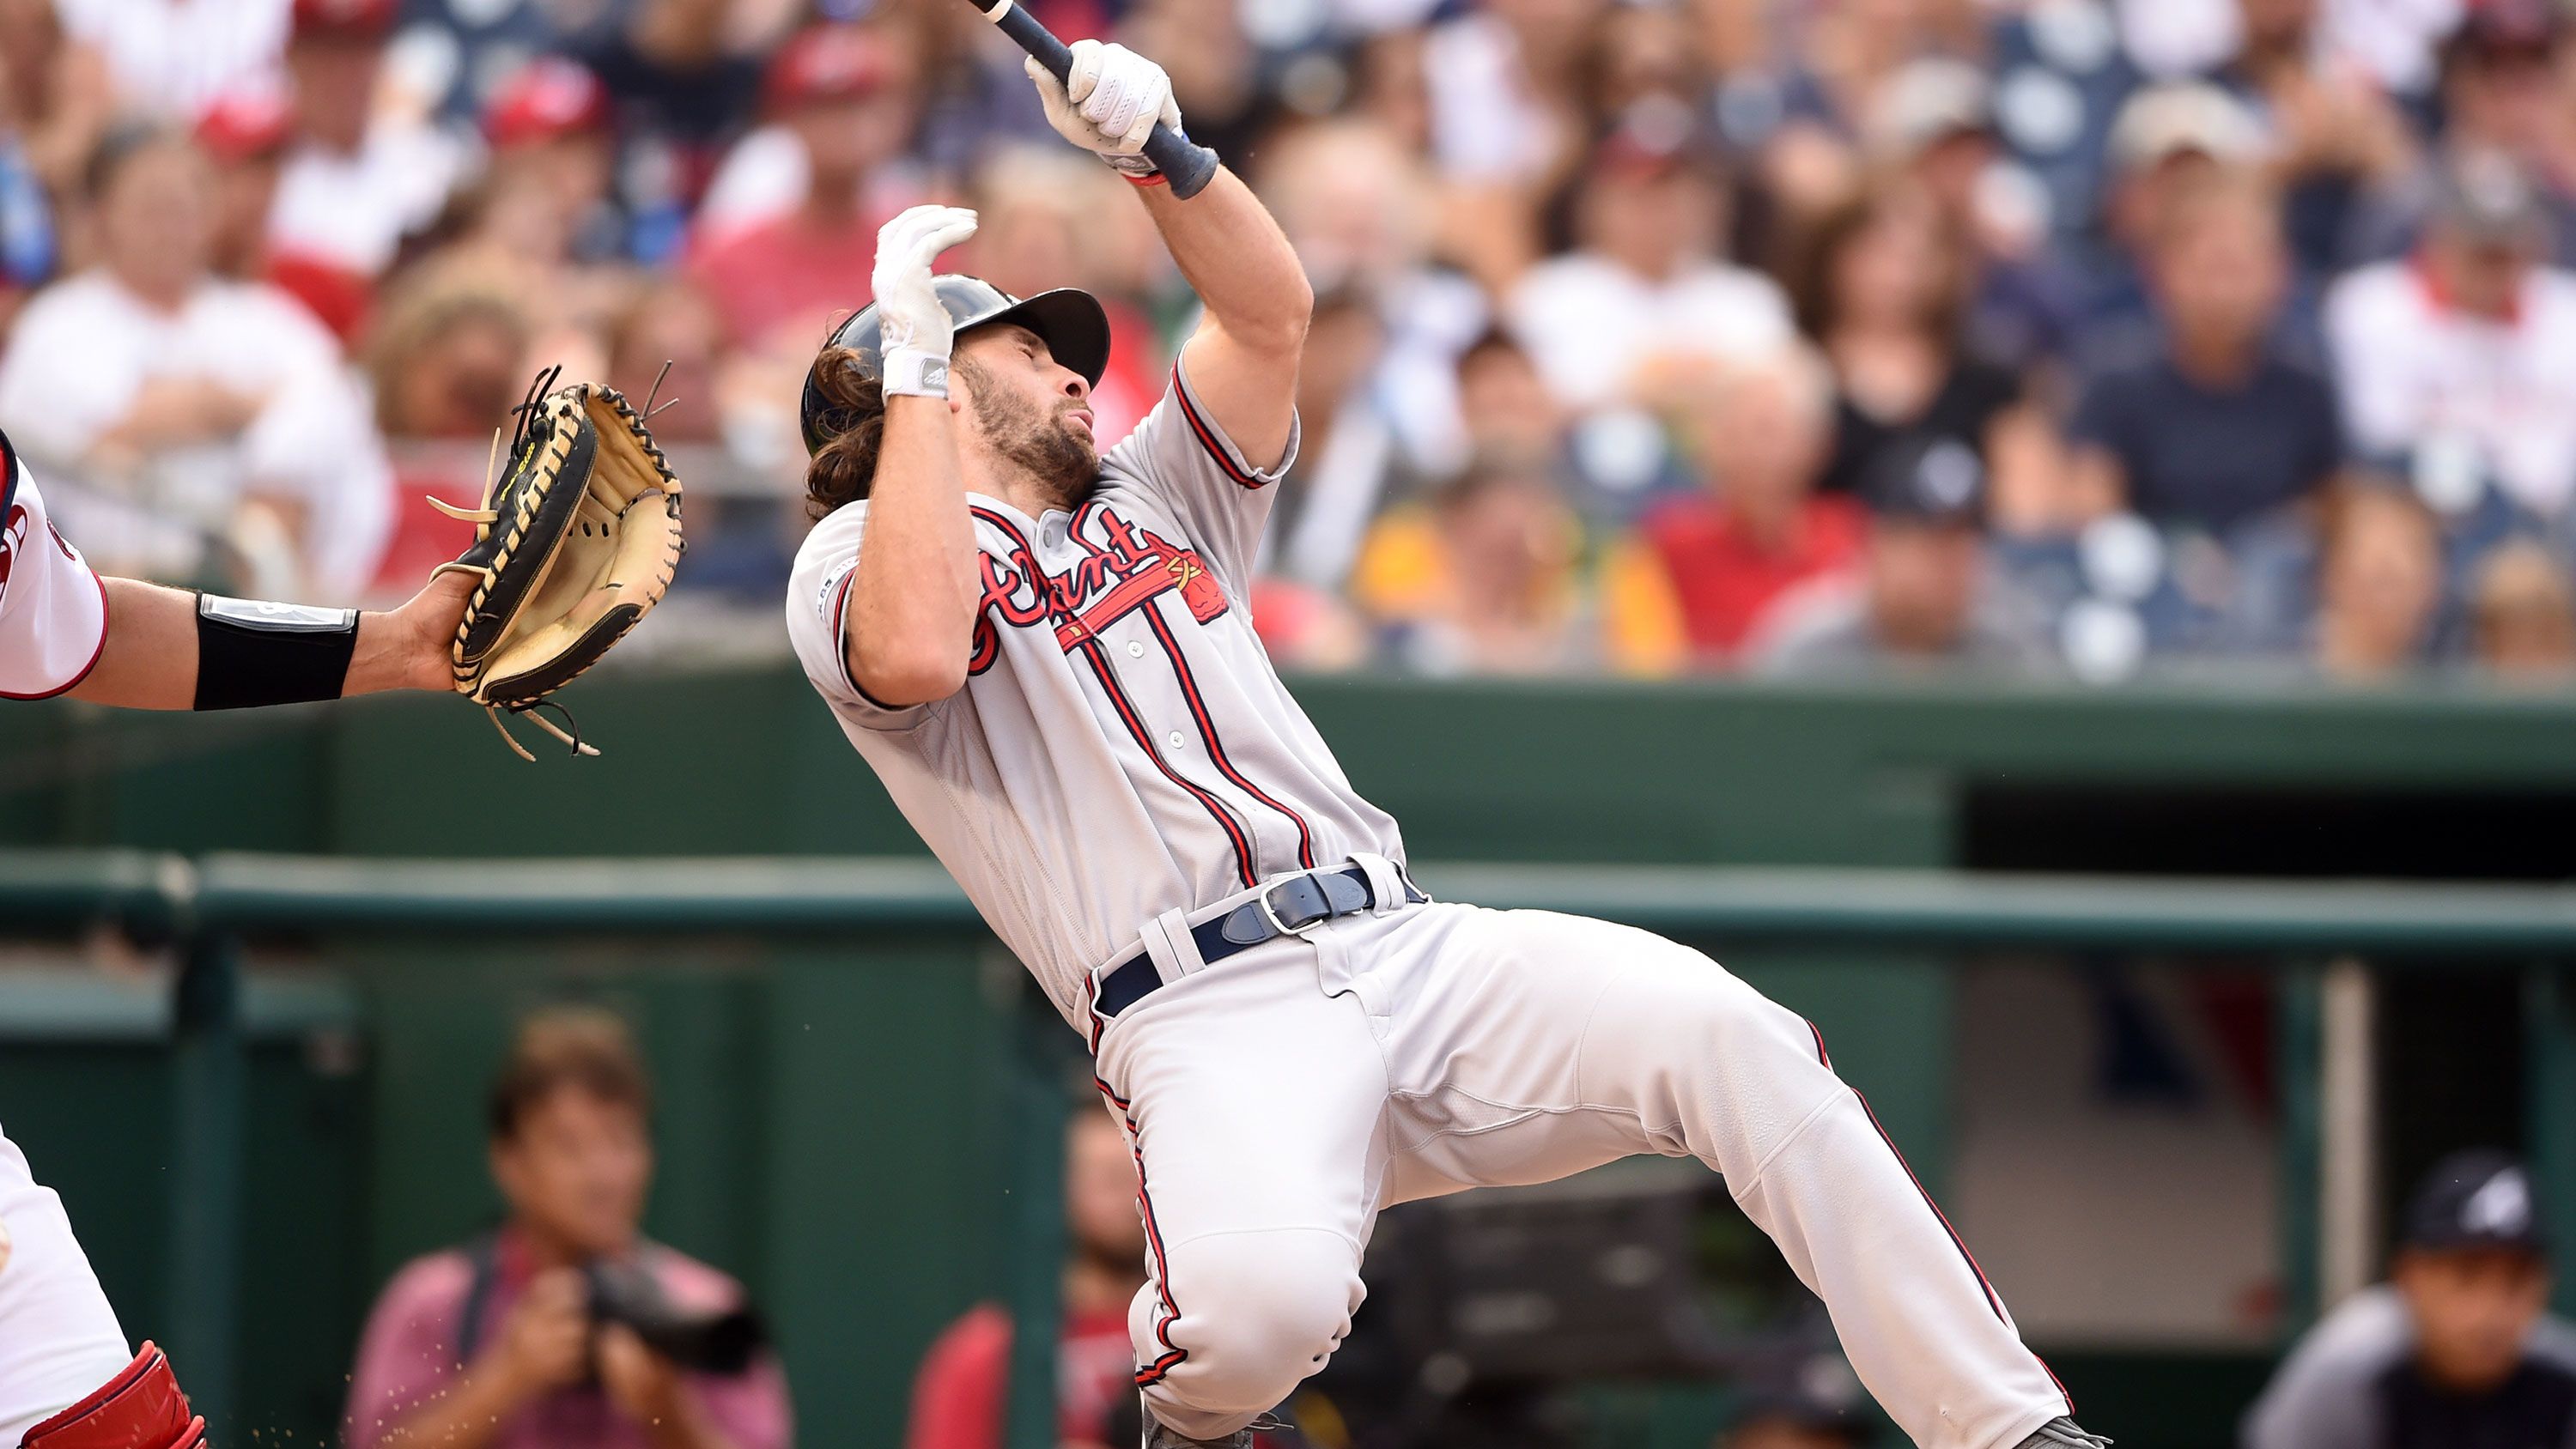 The Braves called up Charlie Culberson, but why hasn't he played yet?